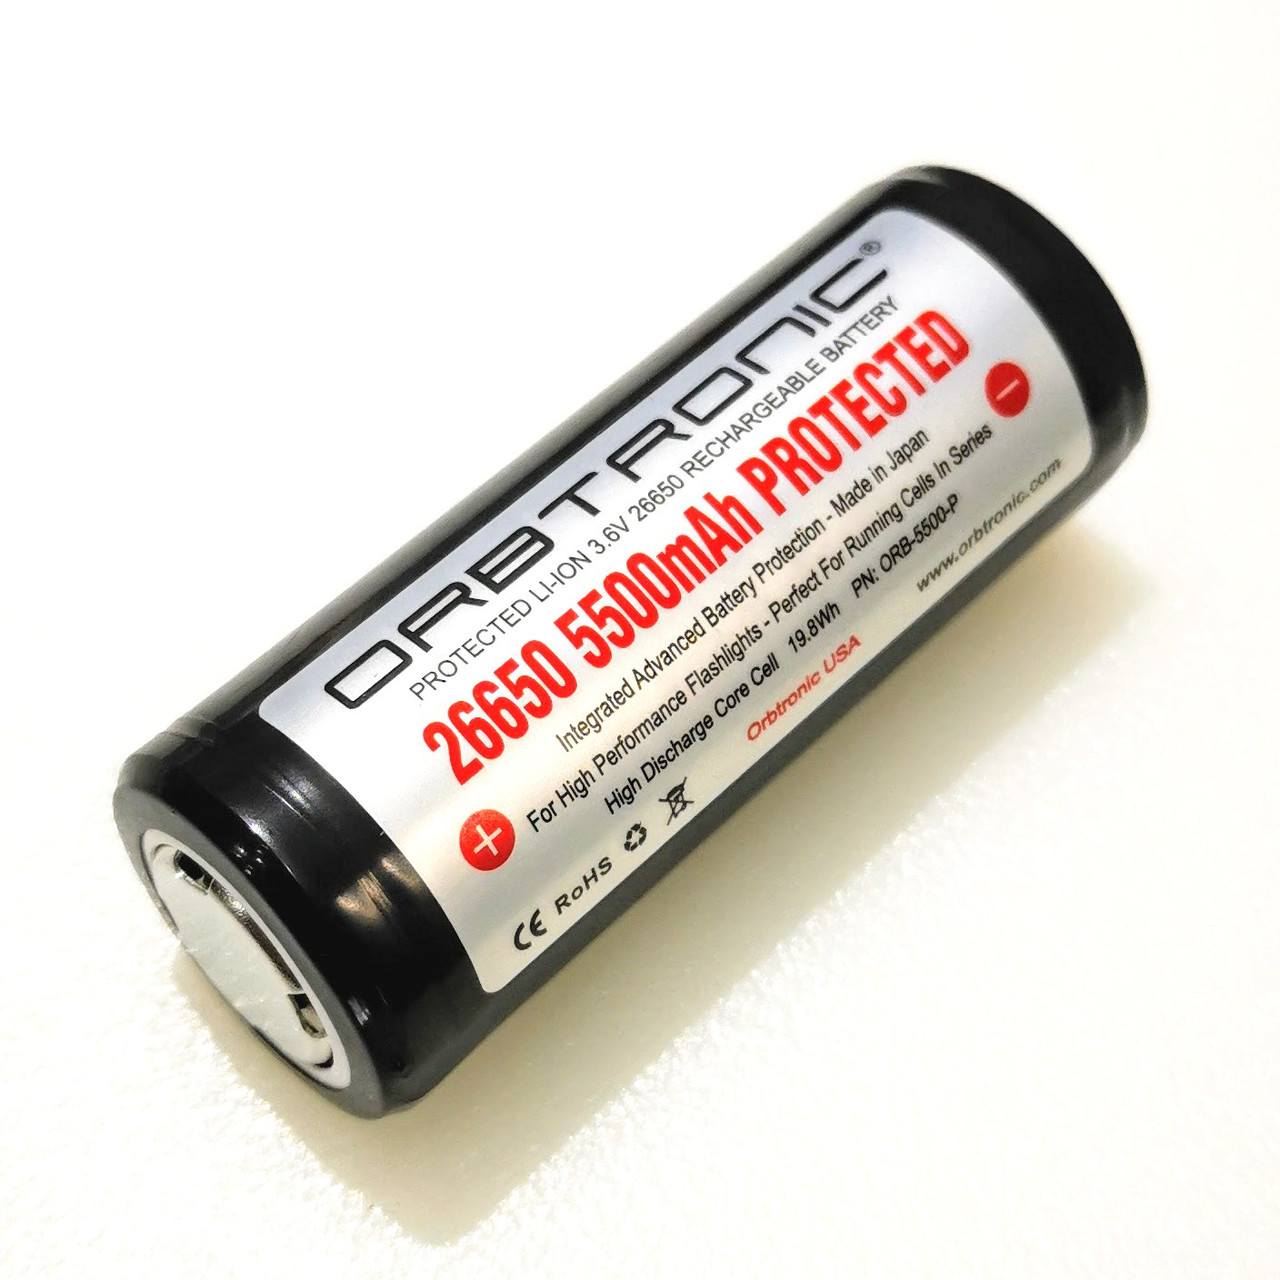 26650 Battery PROTECTED 5500mAh Li-ion Rechargeable Orbtronic for High  Performance Flashlights-Safety Battery Case Included